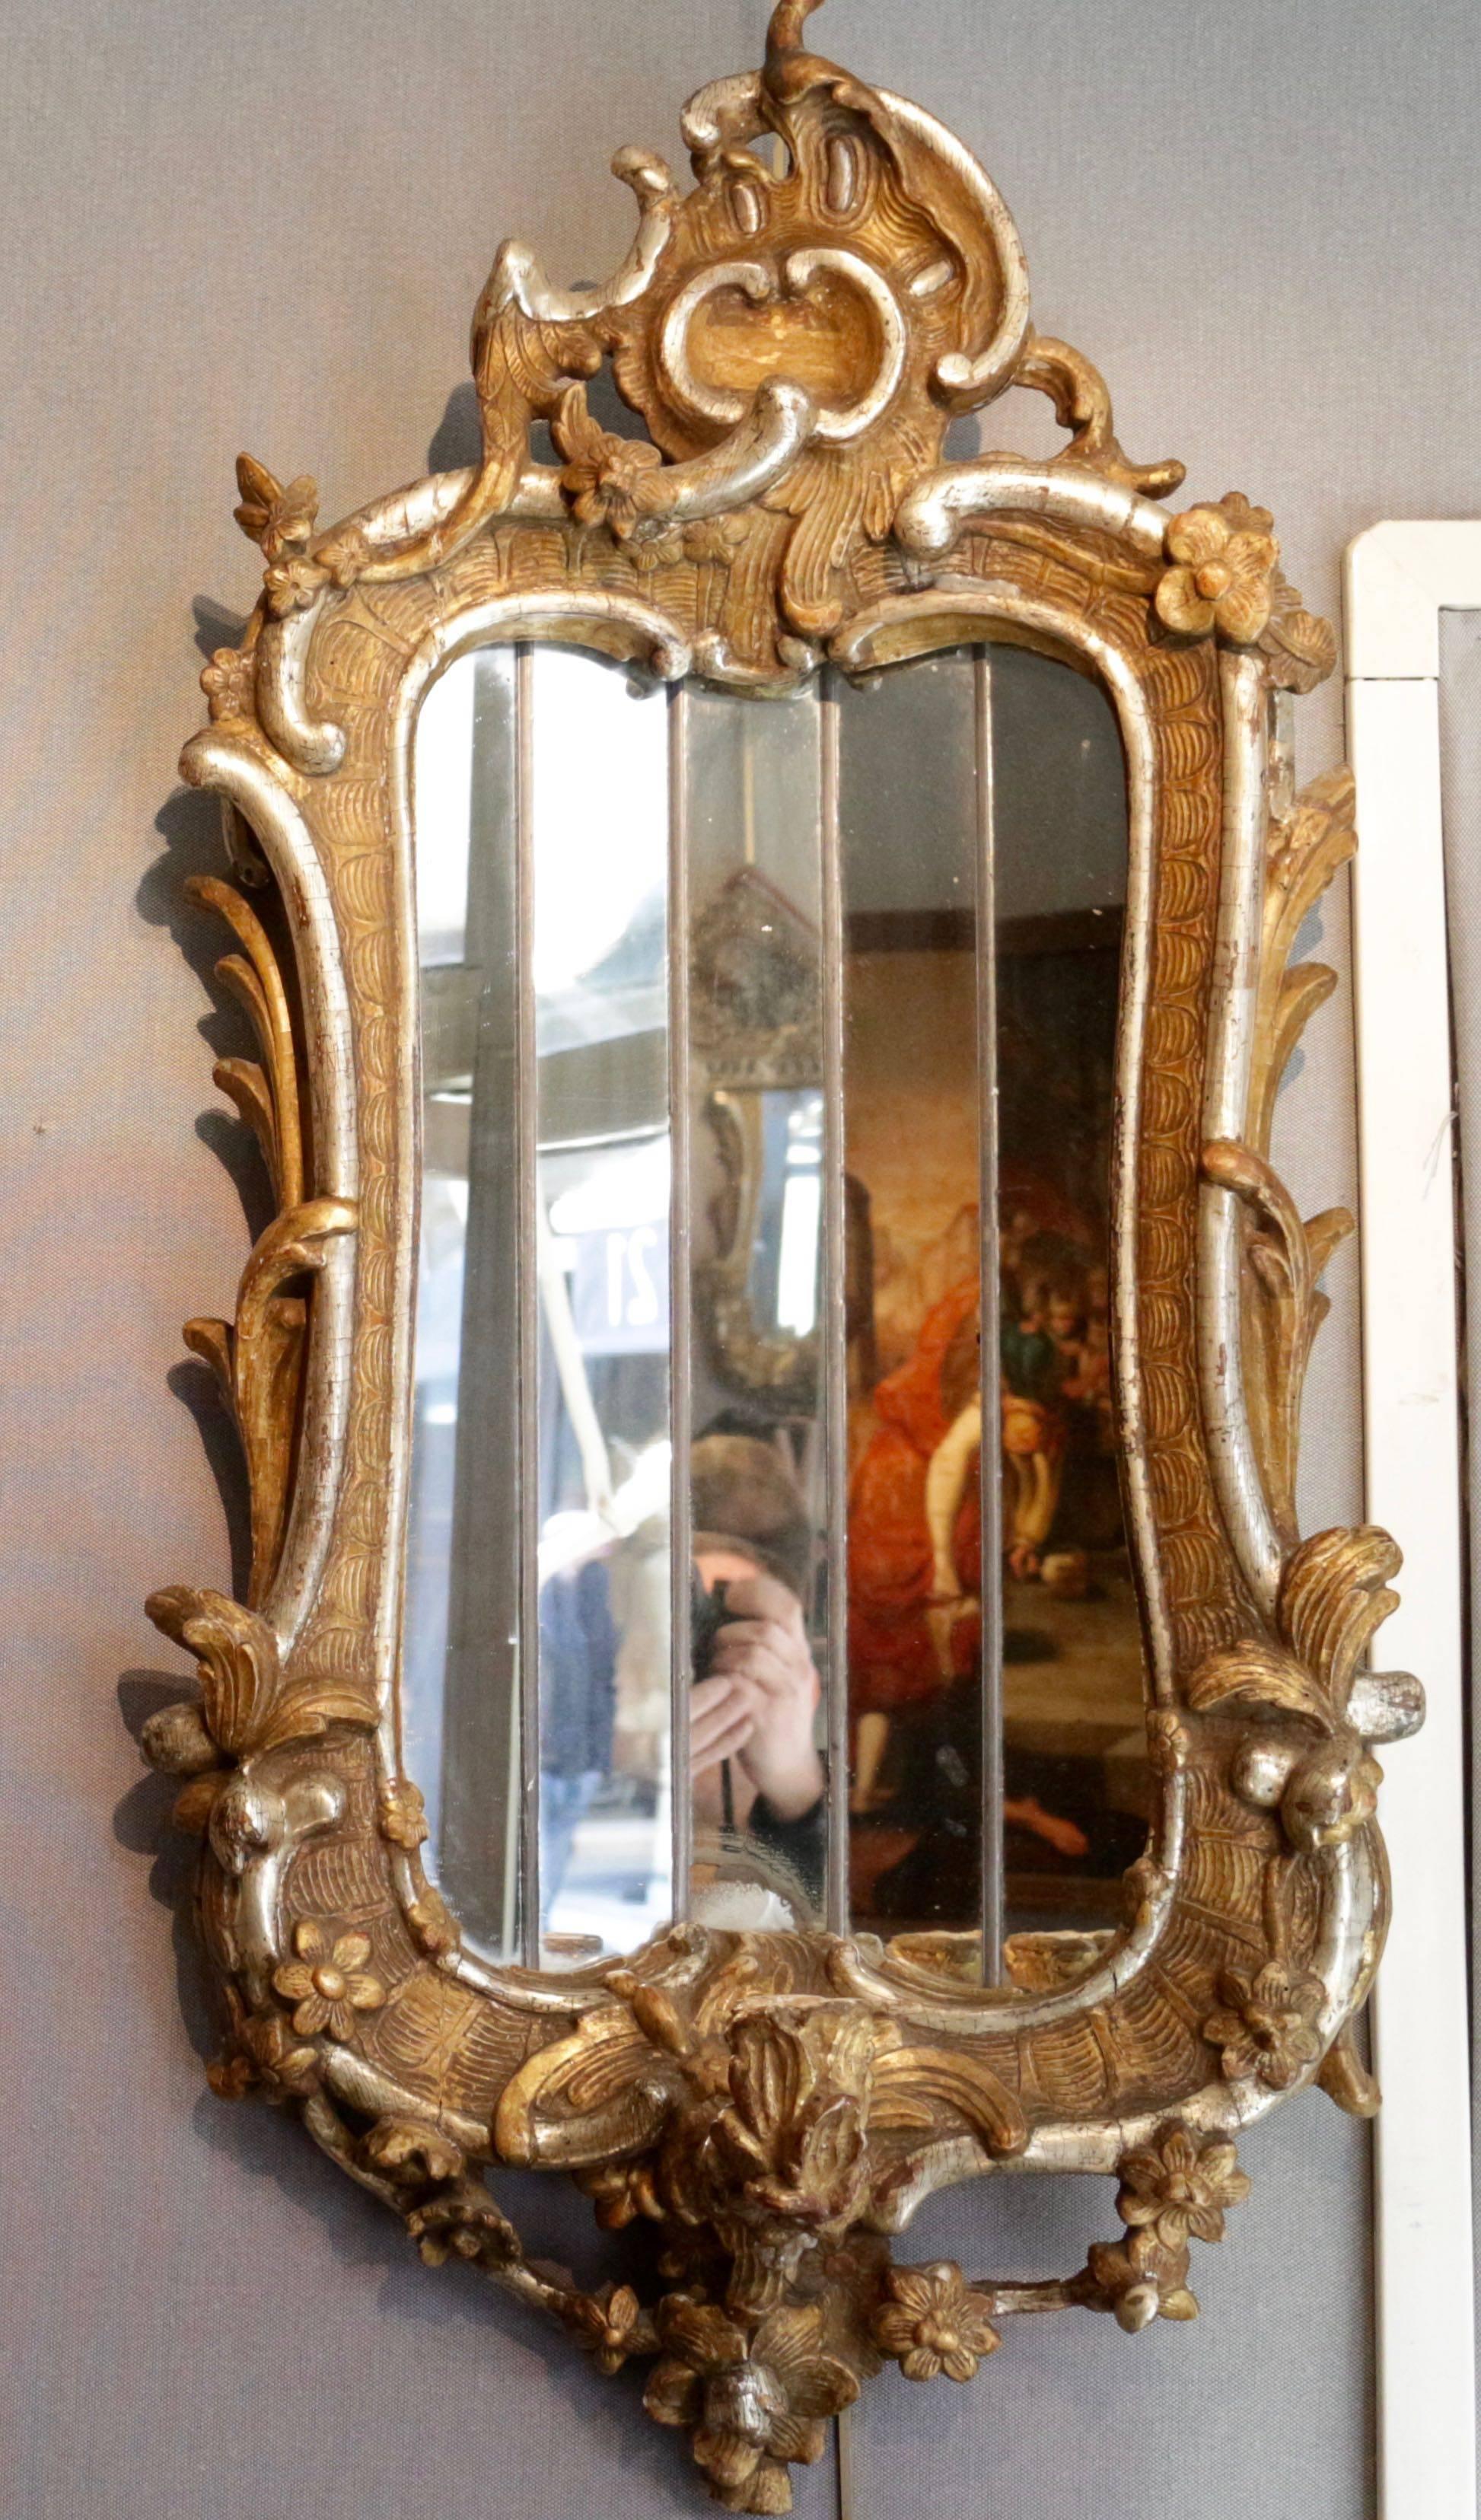 Fantastic and rare pair of Italian mirrors, giltwood and silvered wood, mid-18th century,
with candle holders.
Each convex mirror is made of five-faceted mirror plates in order to reflect the candlelight five times.
Some of the mirror plates are